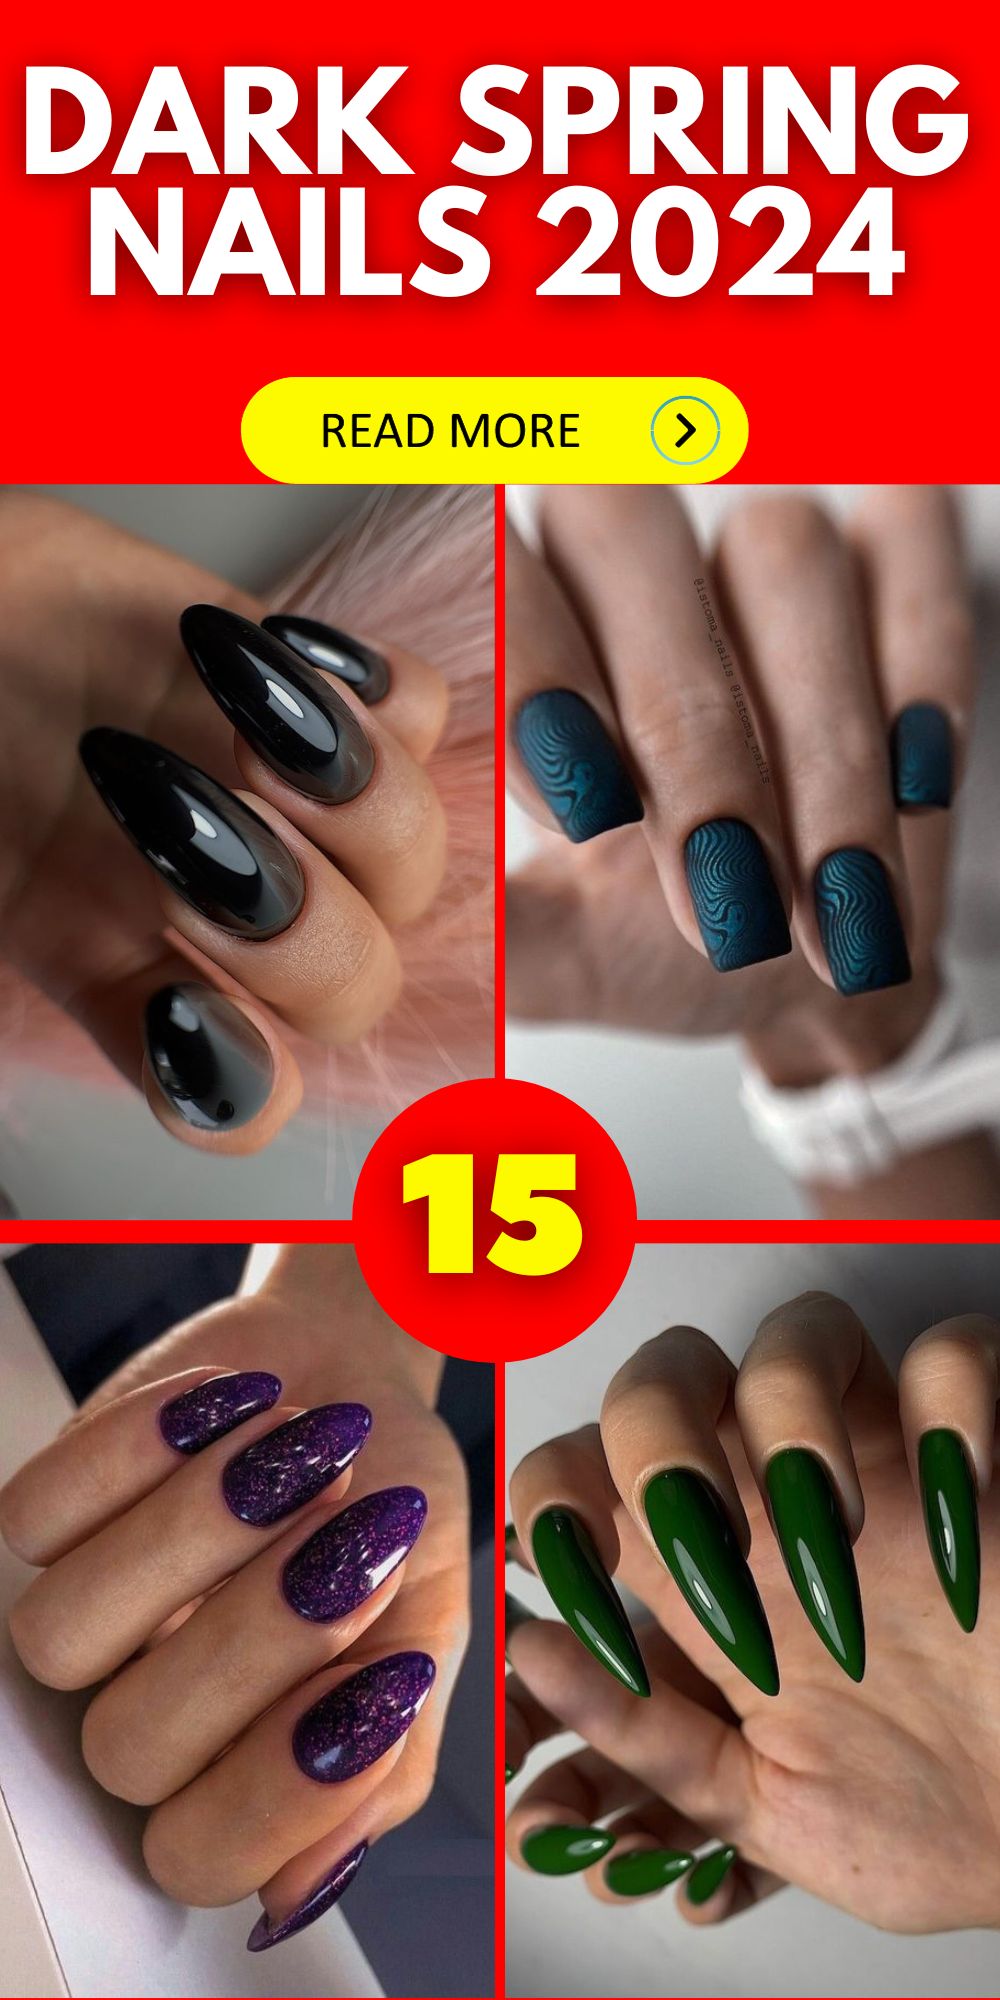 Embrace 2024 with Chic Dark Spring Nail Trends - Colors & Designs